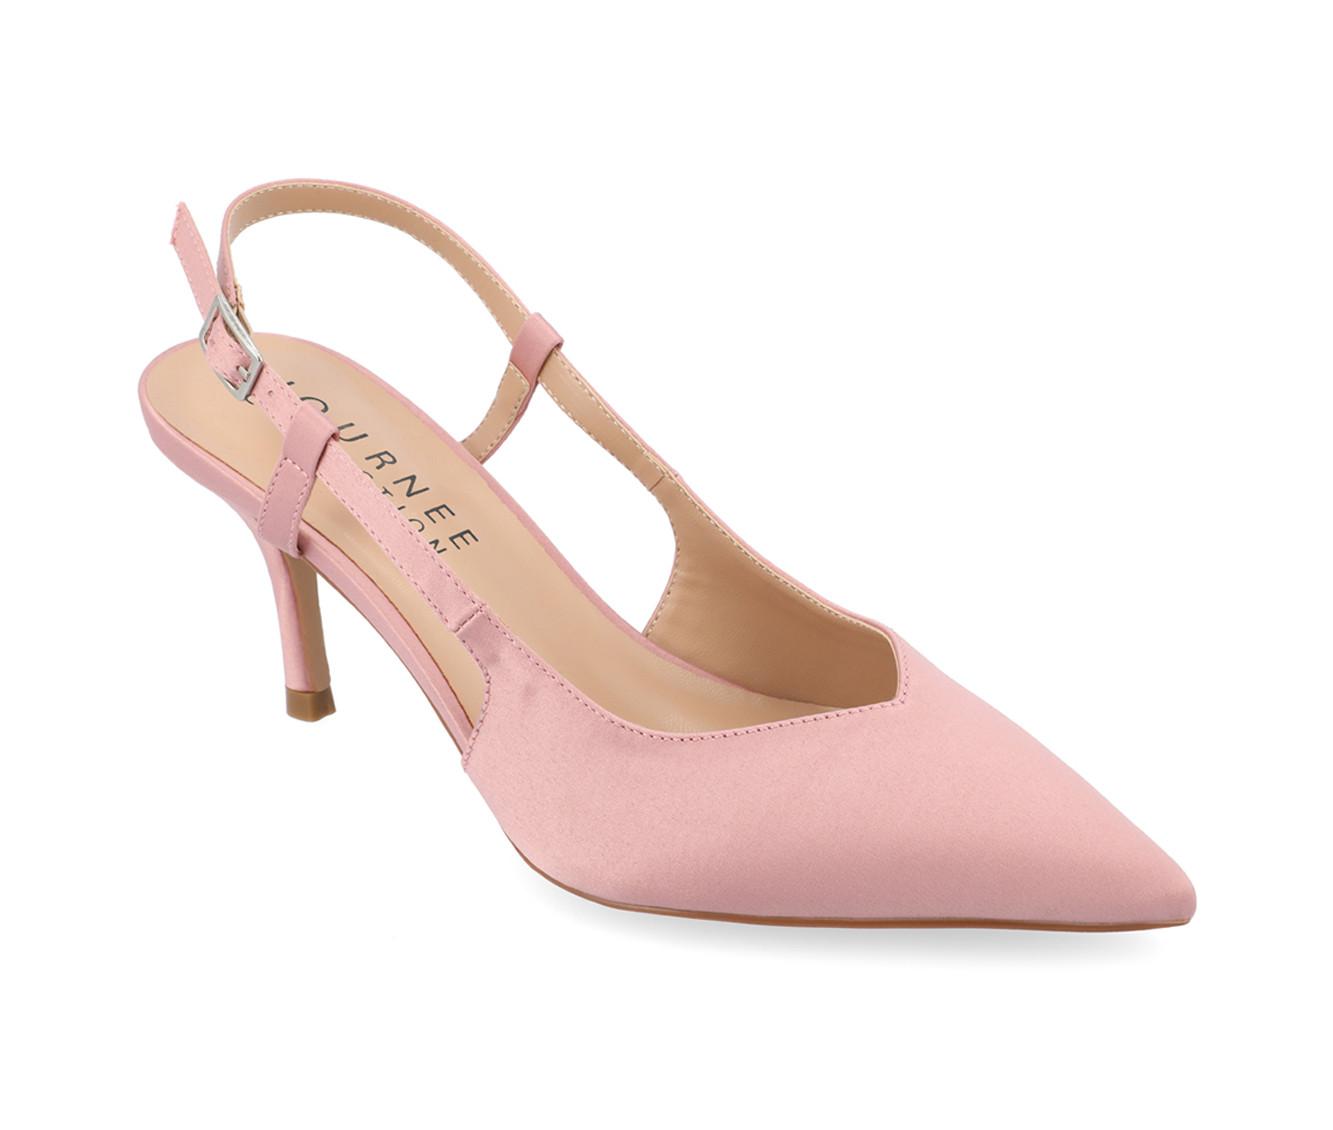 Women's Journee Collection Knightly Slingback Pumps